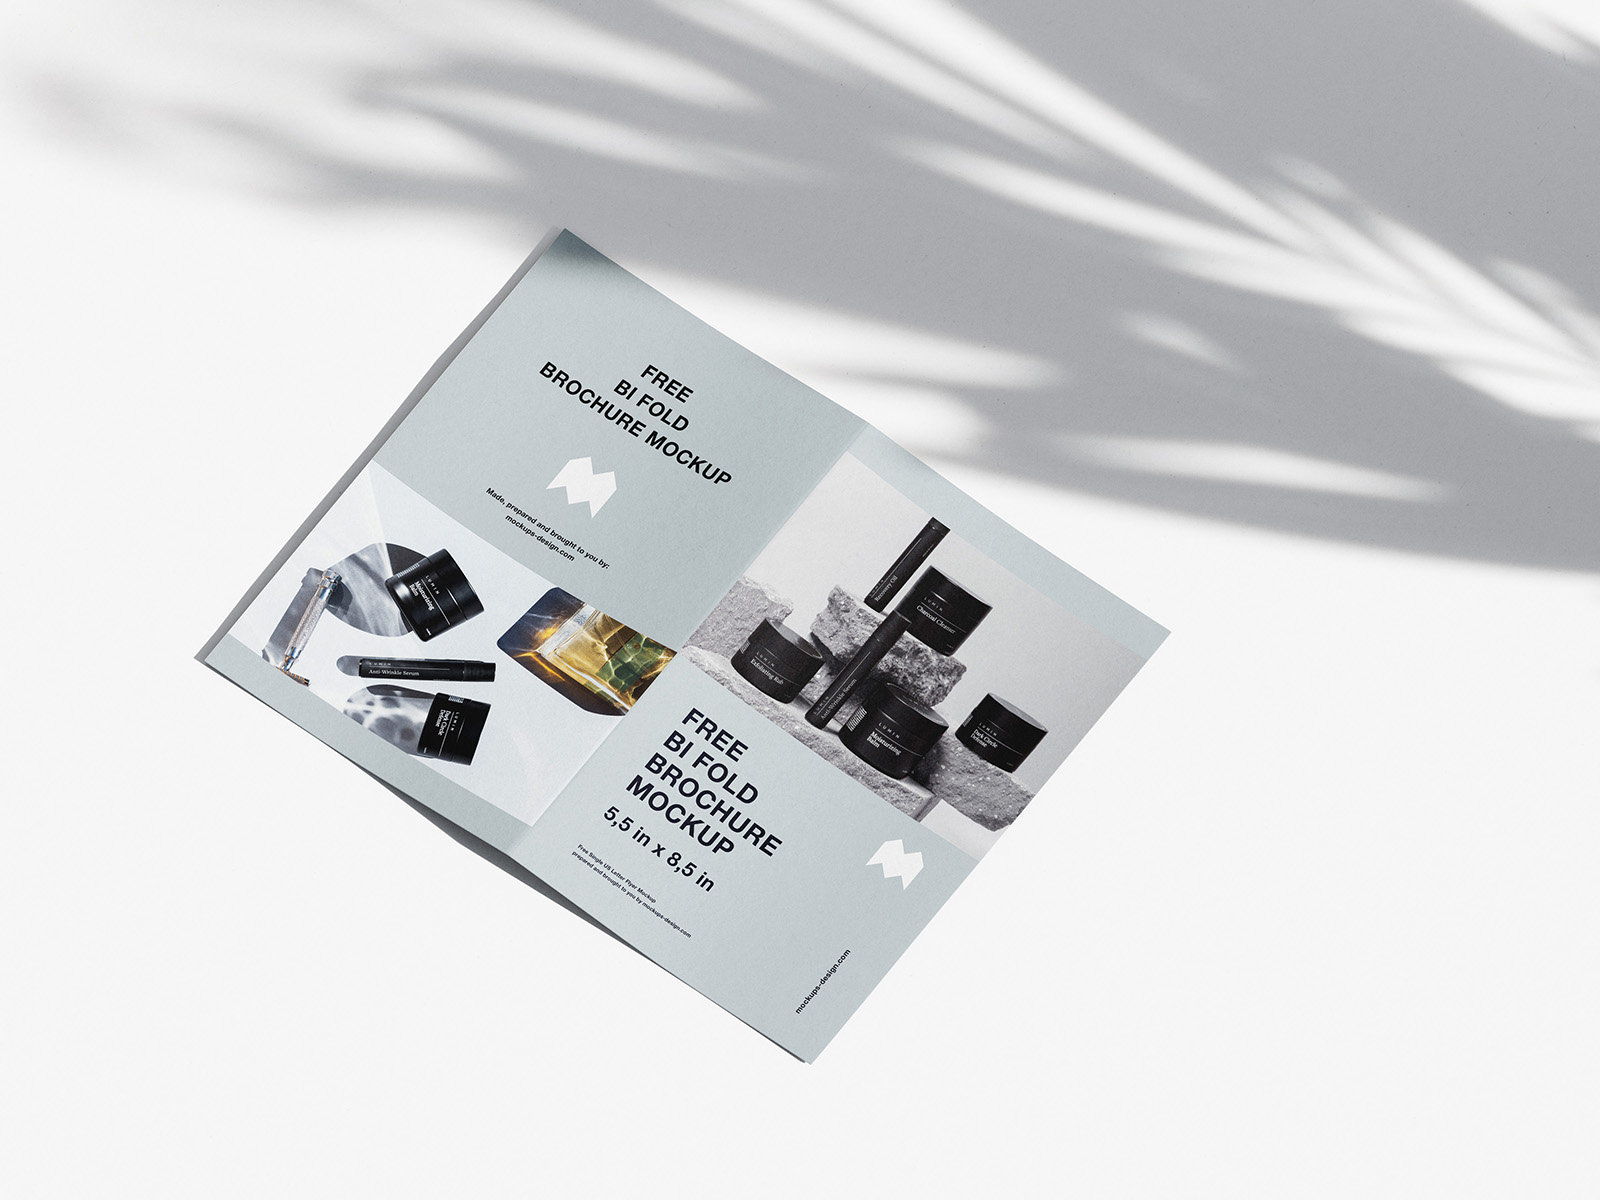 3 Bifold Brochure Mockups from the Top View with Extended Shadows FREE PSD